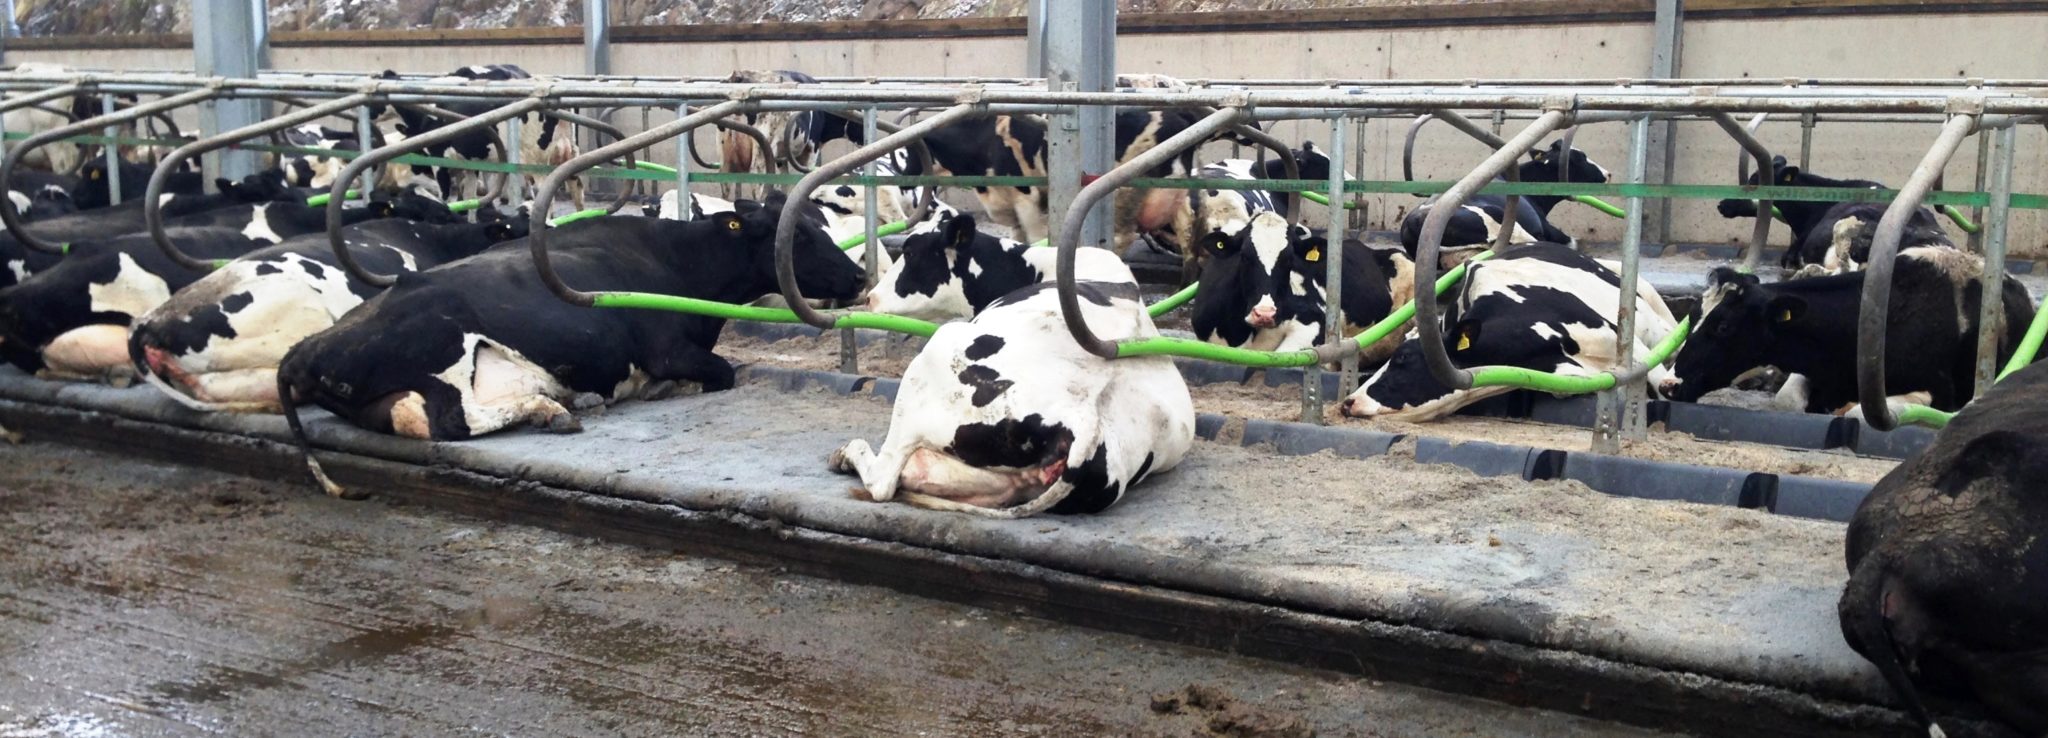 More comfortable cows with Cowcoons and Gel Mattresses - Wilson Agri